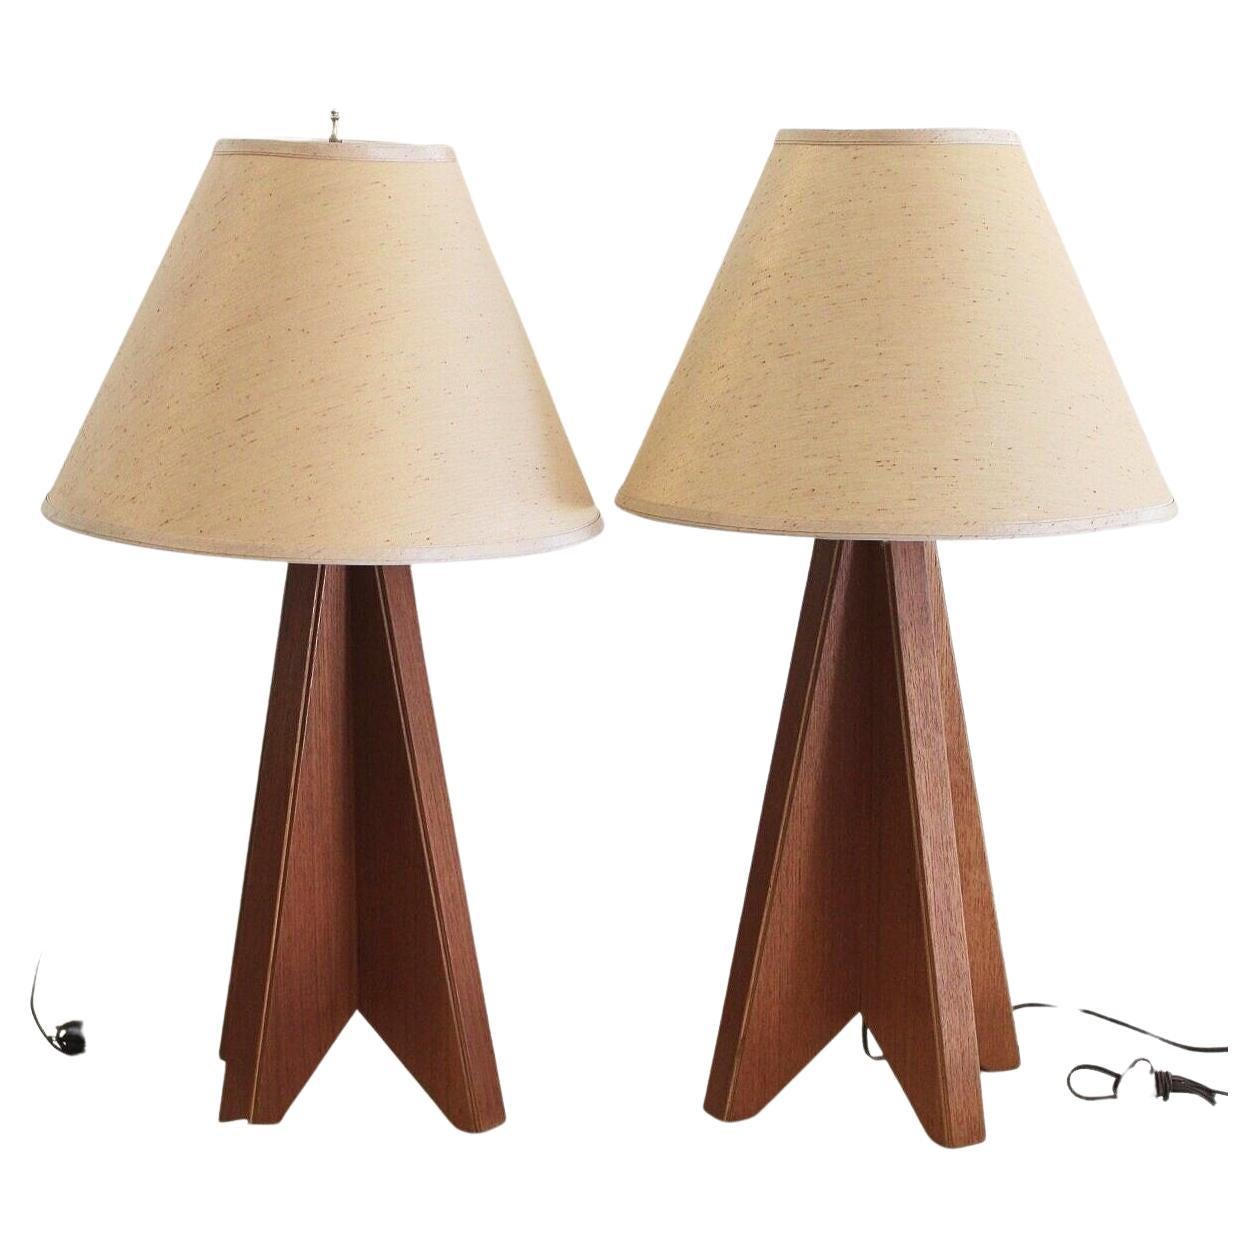 Pair of architectural origami teak tripod lamps, 1970s